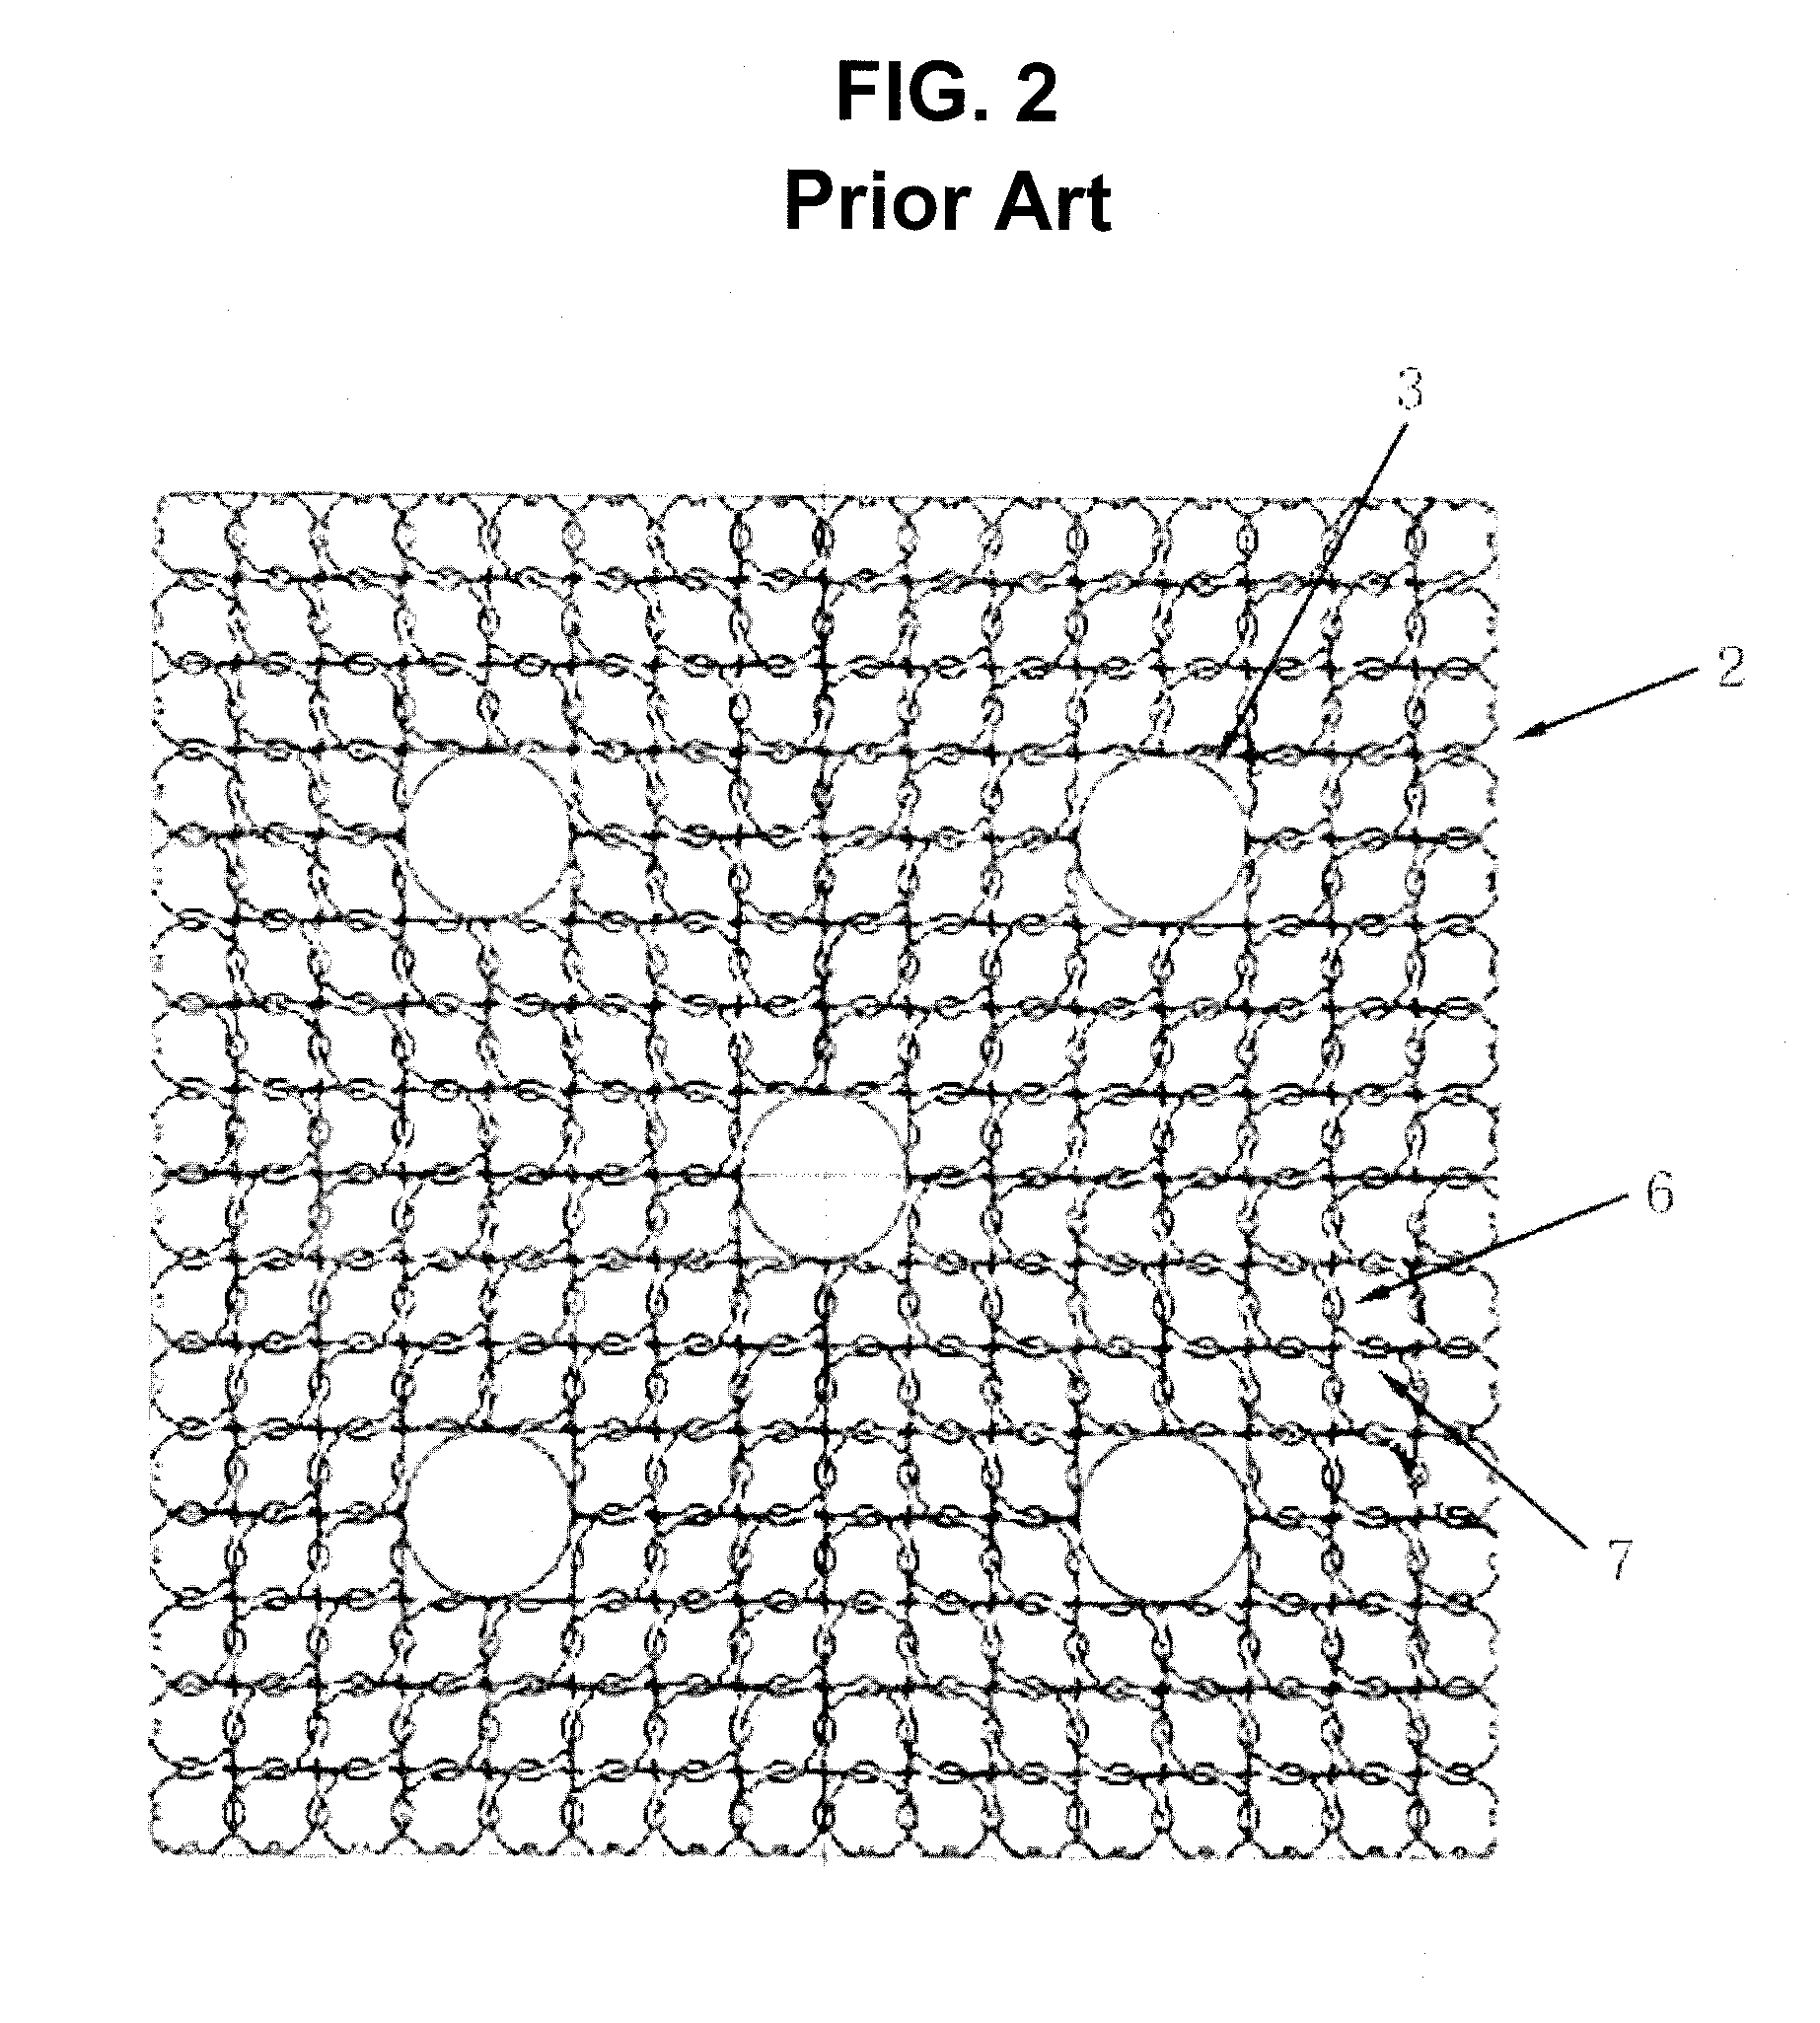 Debris filtering bottom spacer grid with louvers for preventing uplift of fuel rods